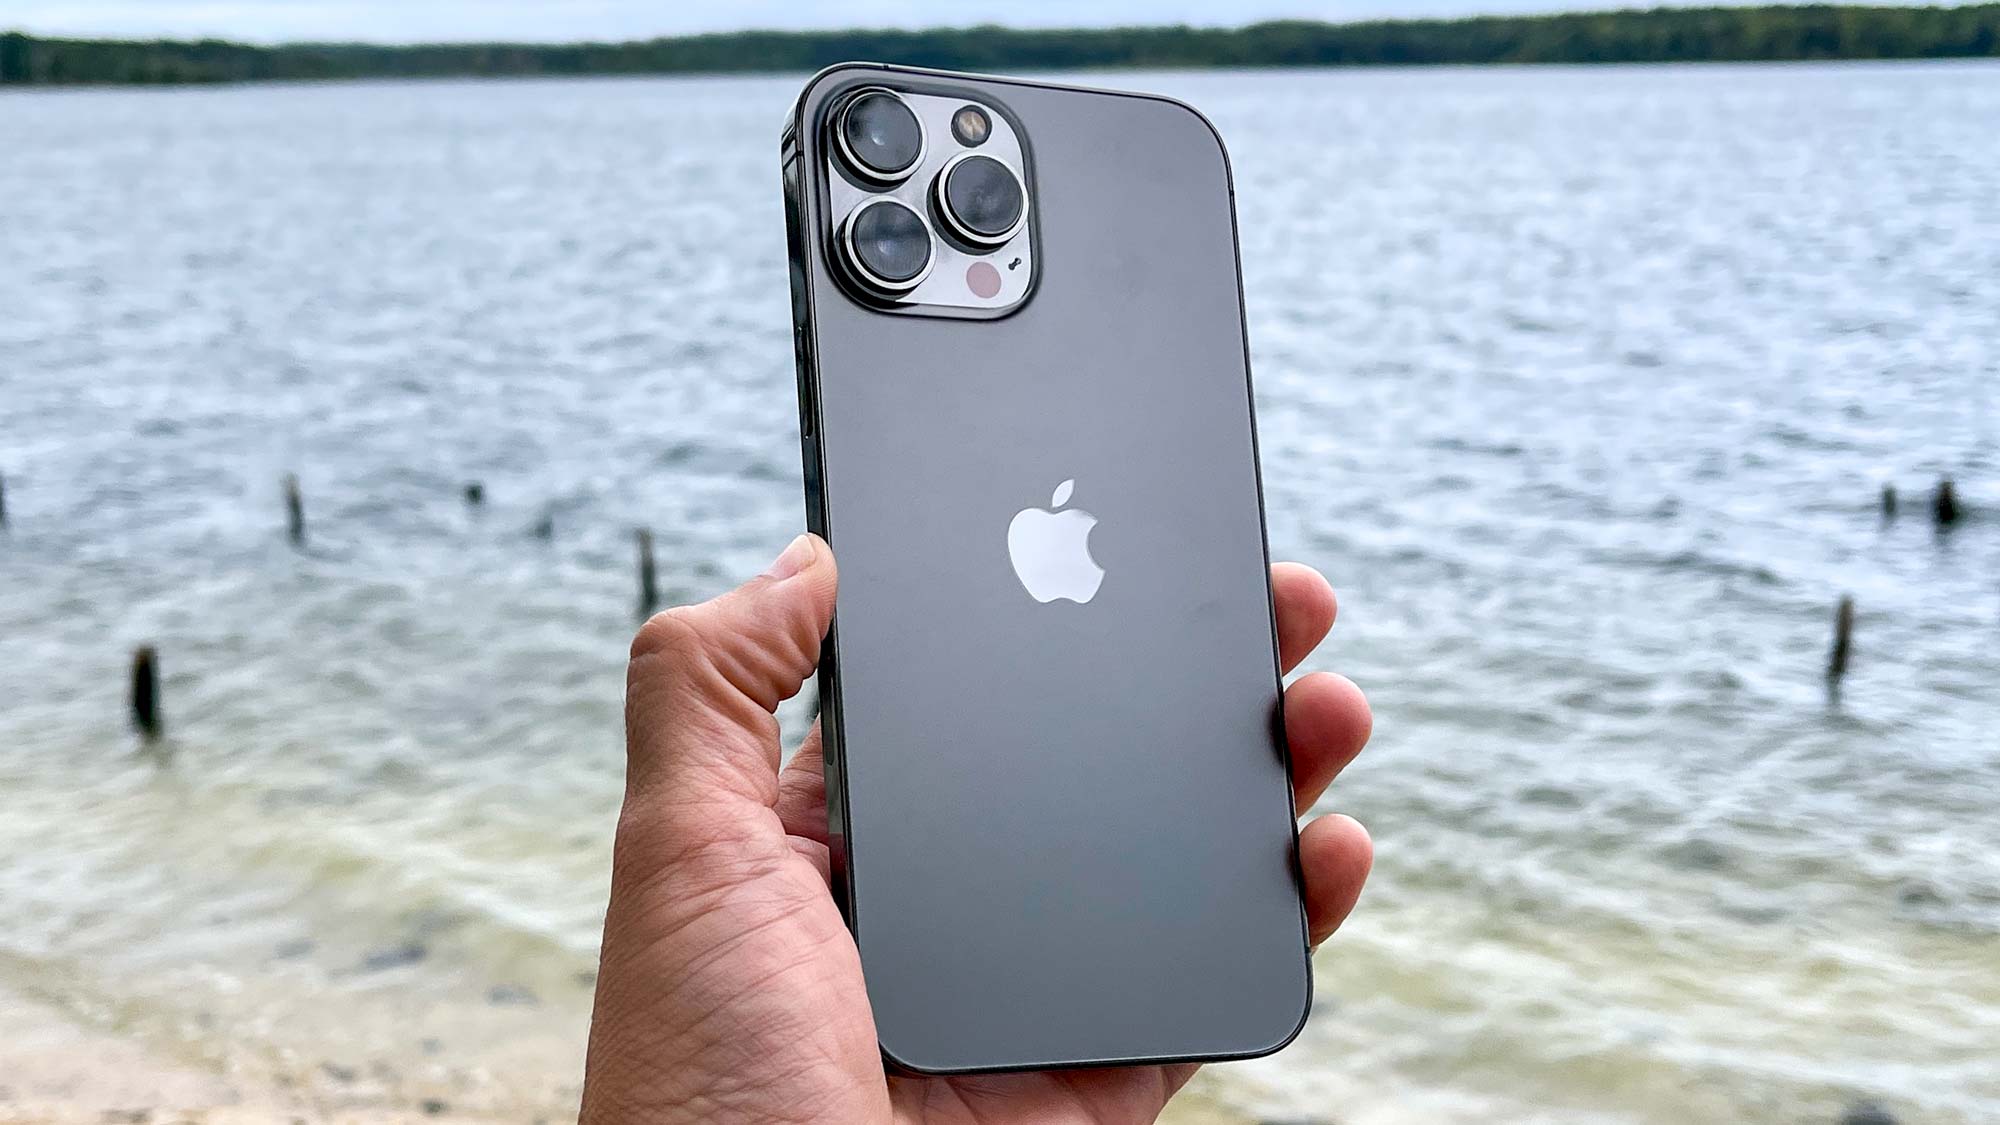 iPhone 13 Pro Max in grey, held in front of water